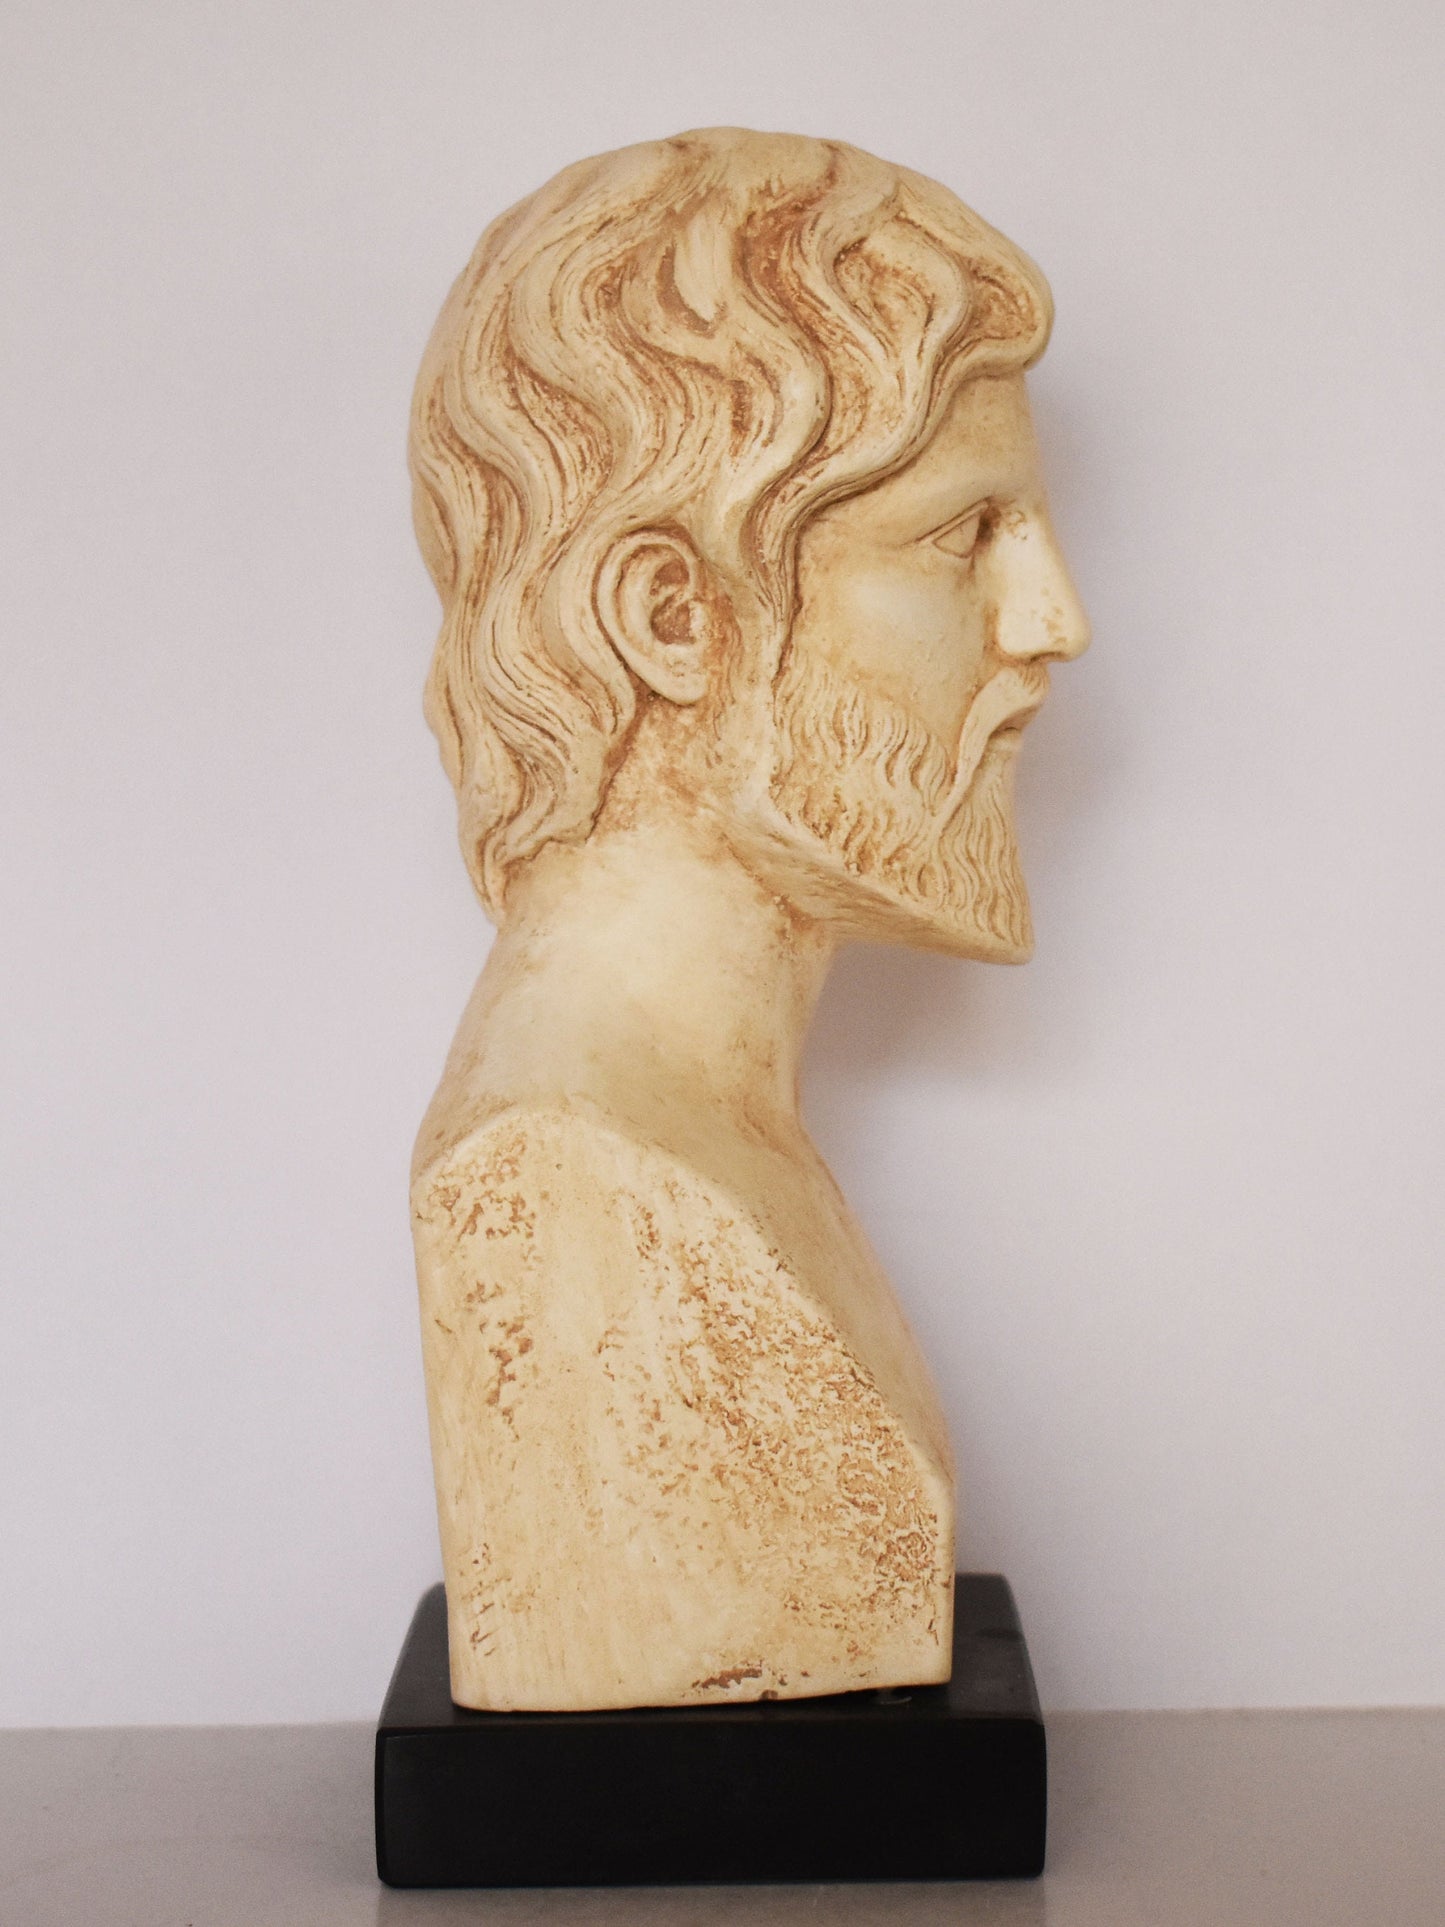 Democritus - 460-370 BC - Ancient Greek Philosopher - The Atomic Theory of the Universe - Marble Base - Museum Reproduction - Head Bust